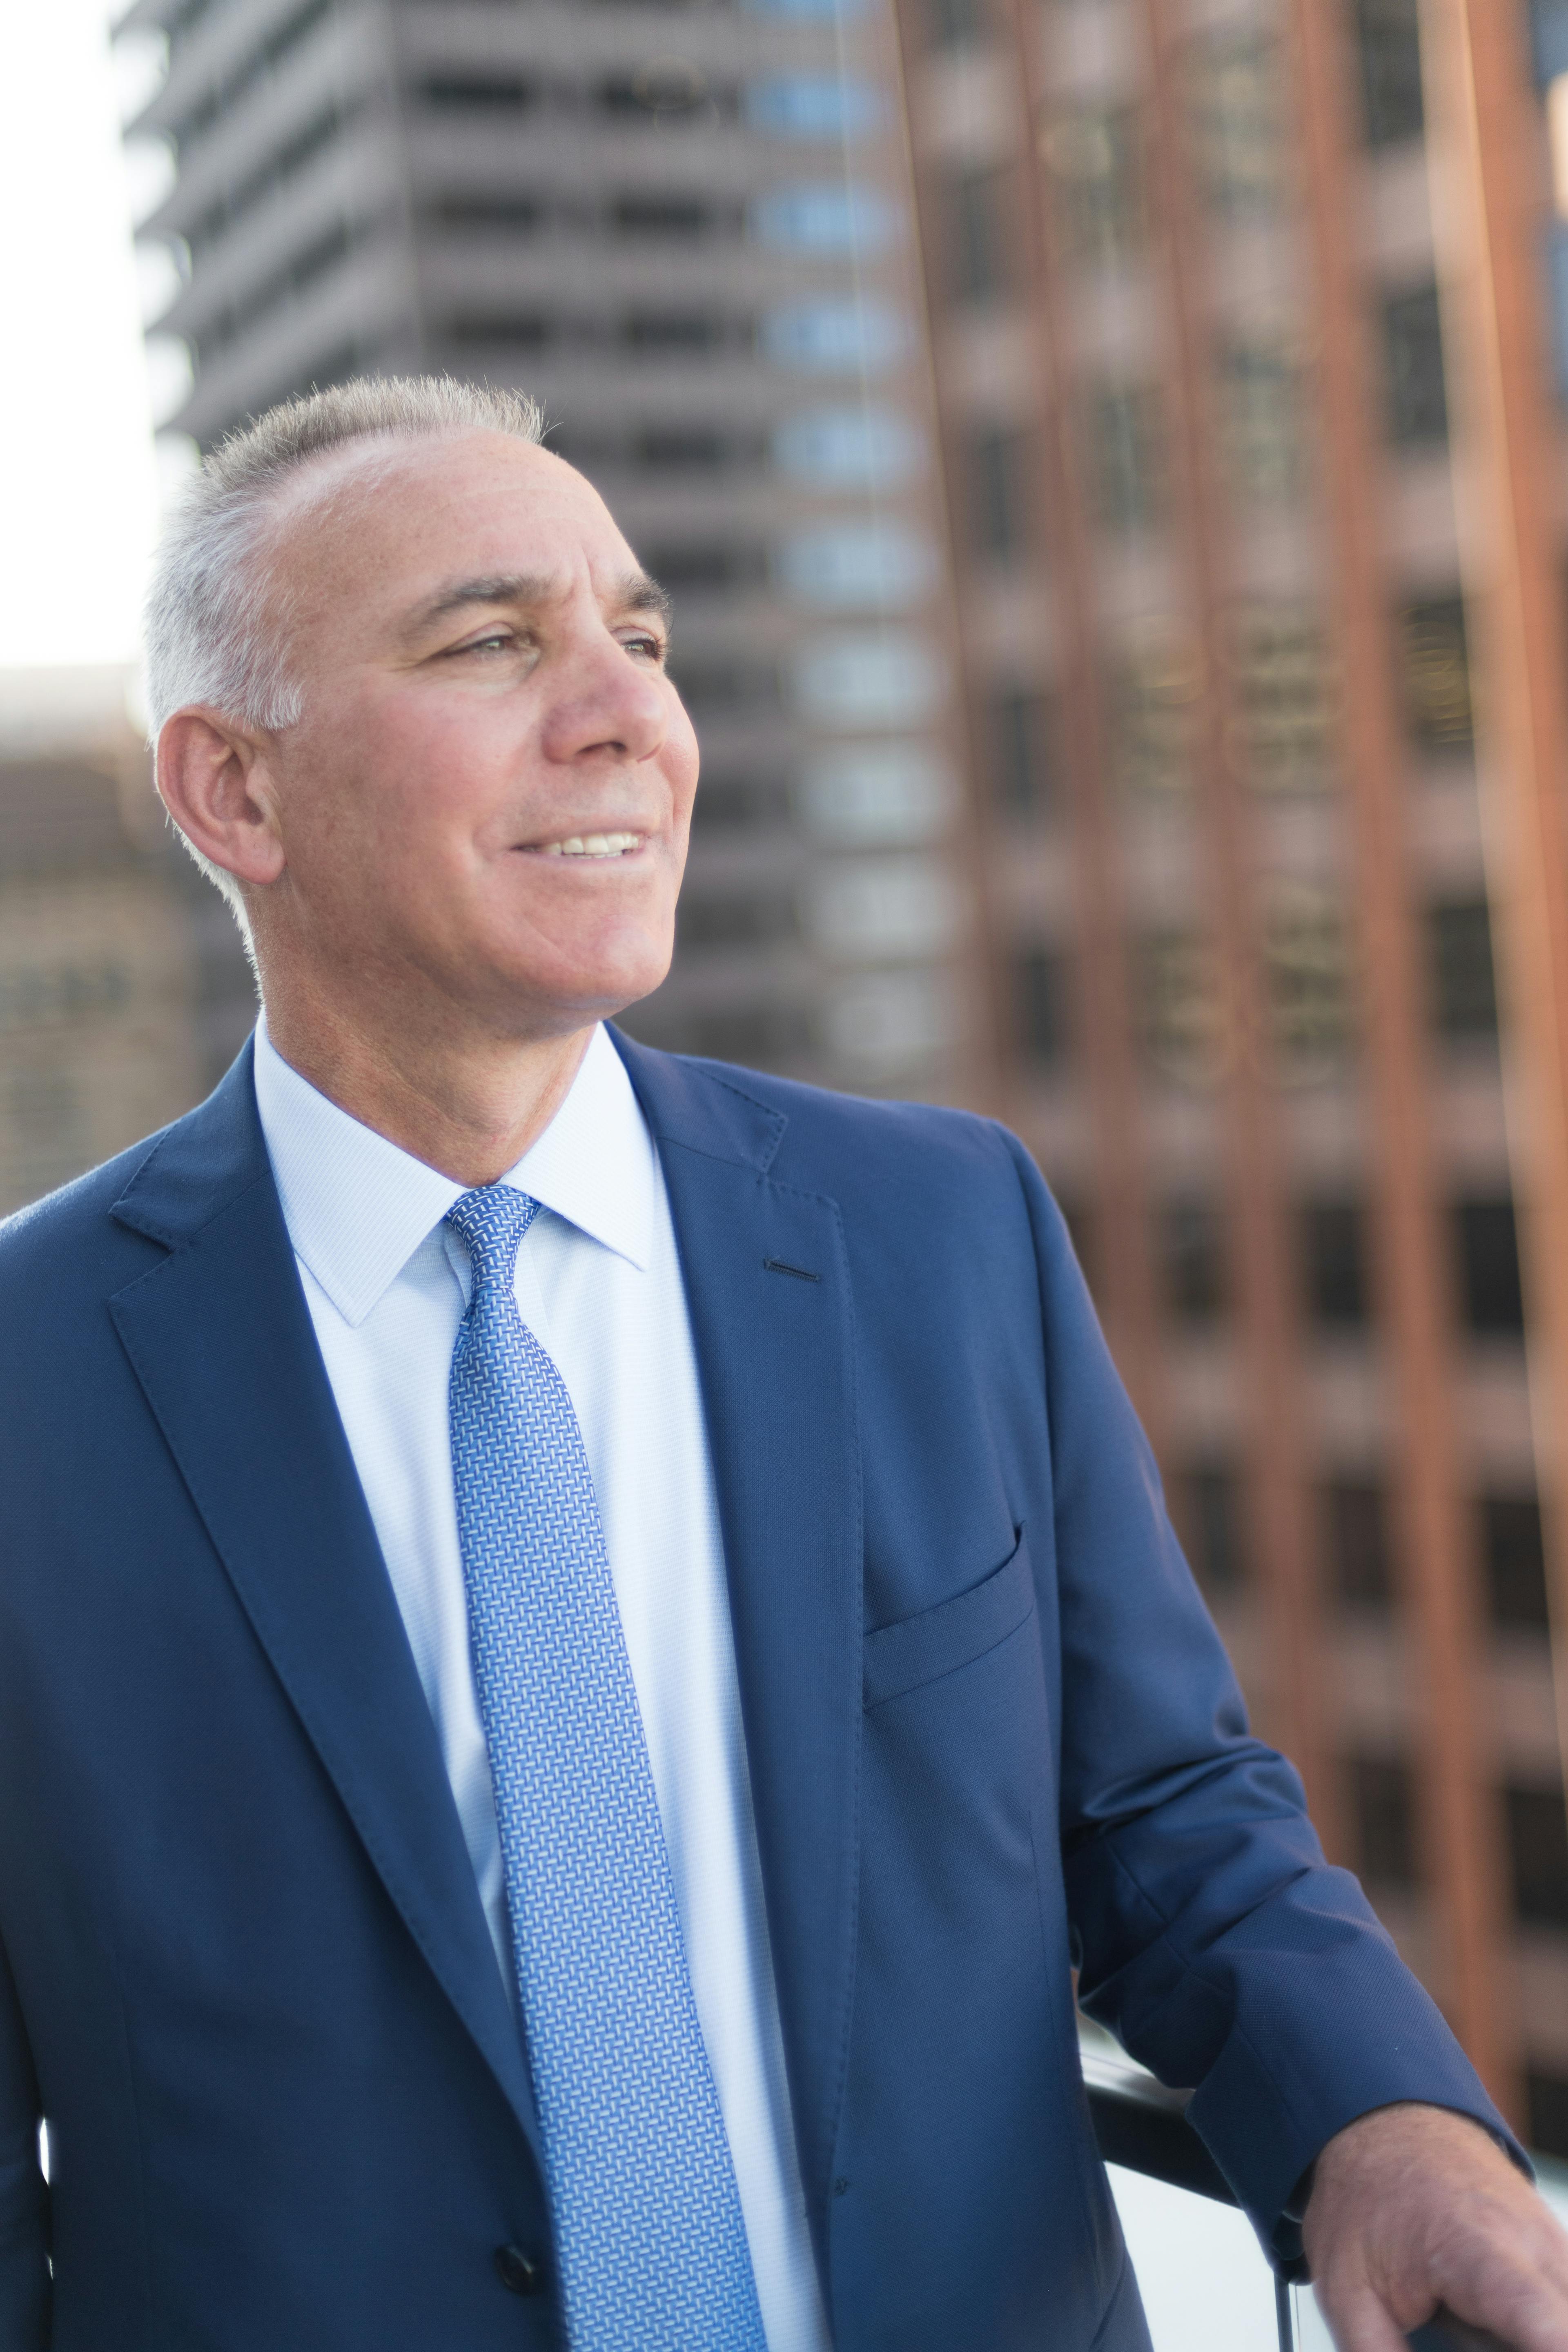 Nixon Peabody CEO and Managing Partner Steve Zubiago, looking to the right, with Boston buildings in the background.